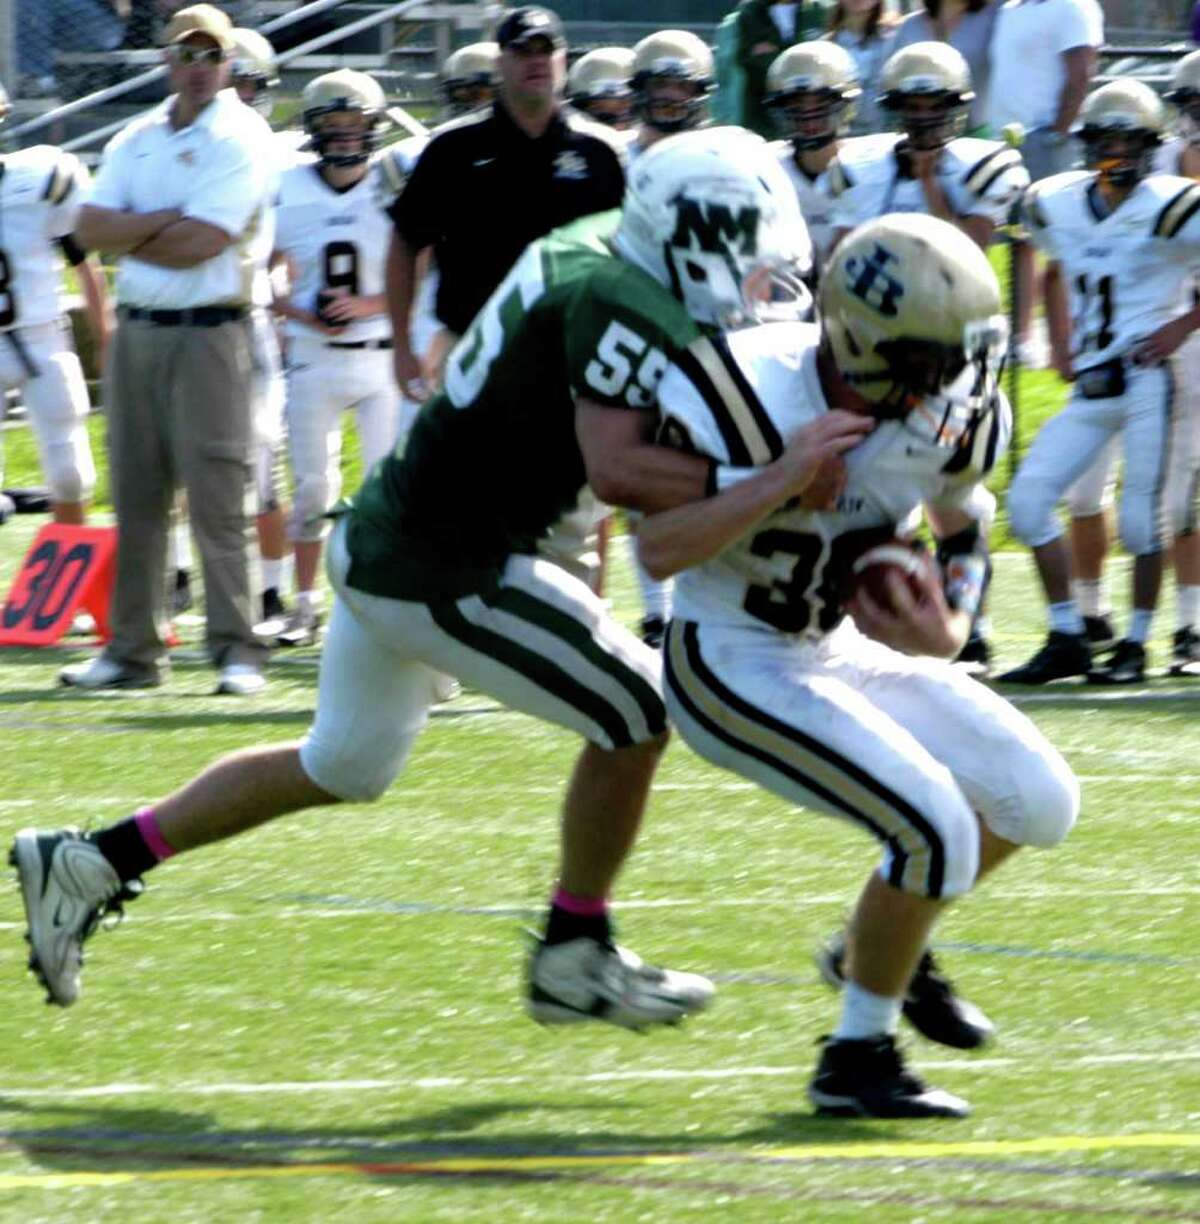 SPECTRUM/The Joel Barlow bench gets a good look as Green Wave defender Sean Doenias drags down a Falcon ballcarrier during New Milford High School football's 28-9 victory over Barlow, Sunday, Oct. 2, 2011 in Brookfield.